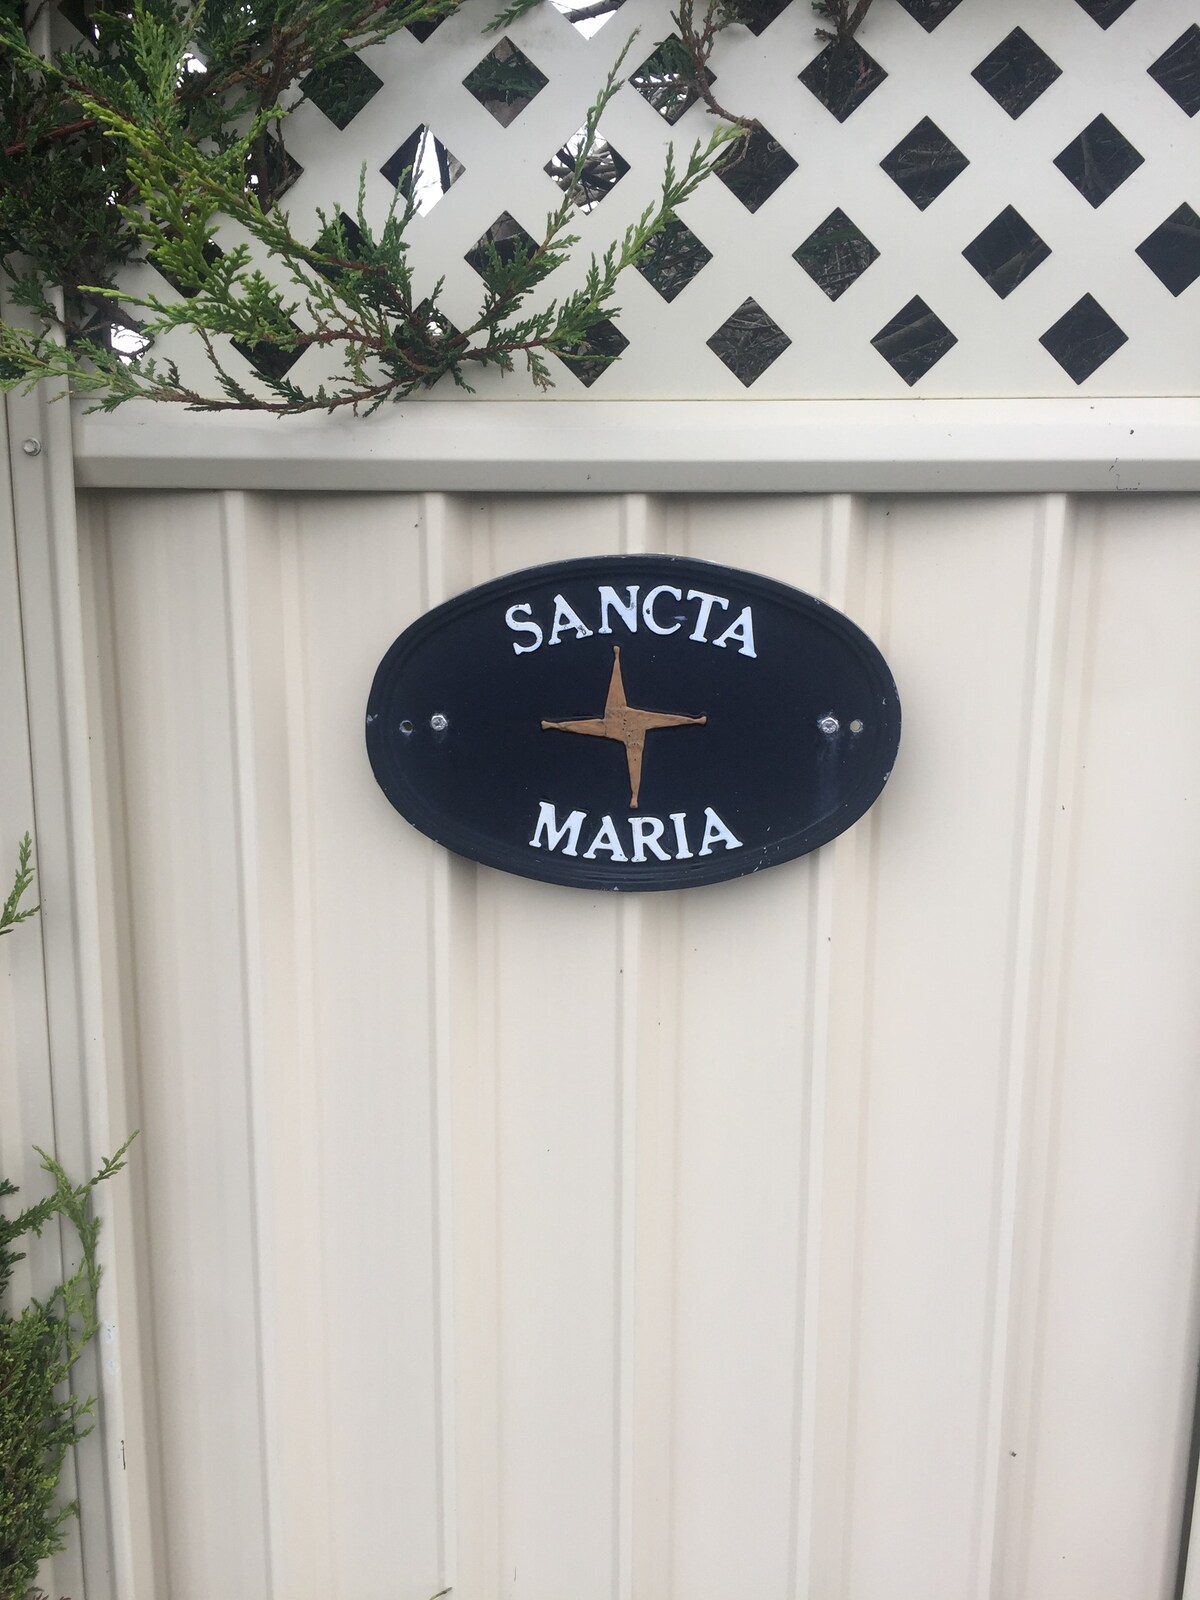 Sancta Maria is a luxury home in Moate